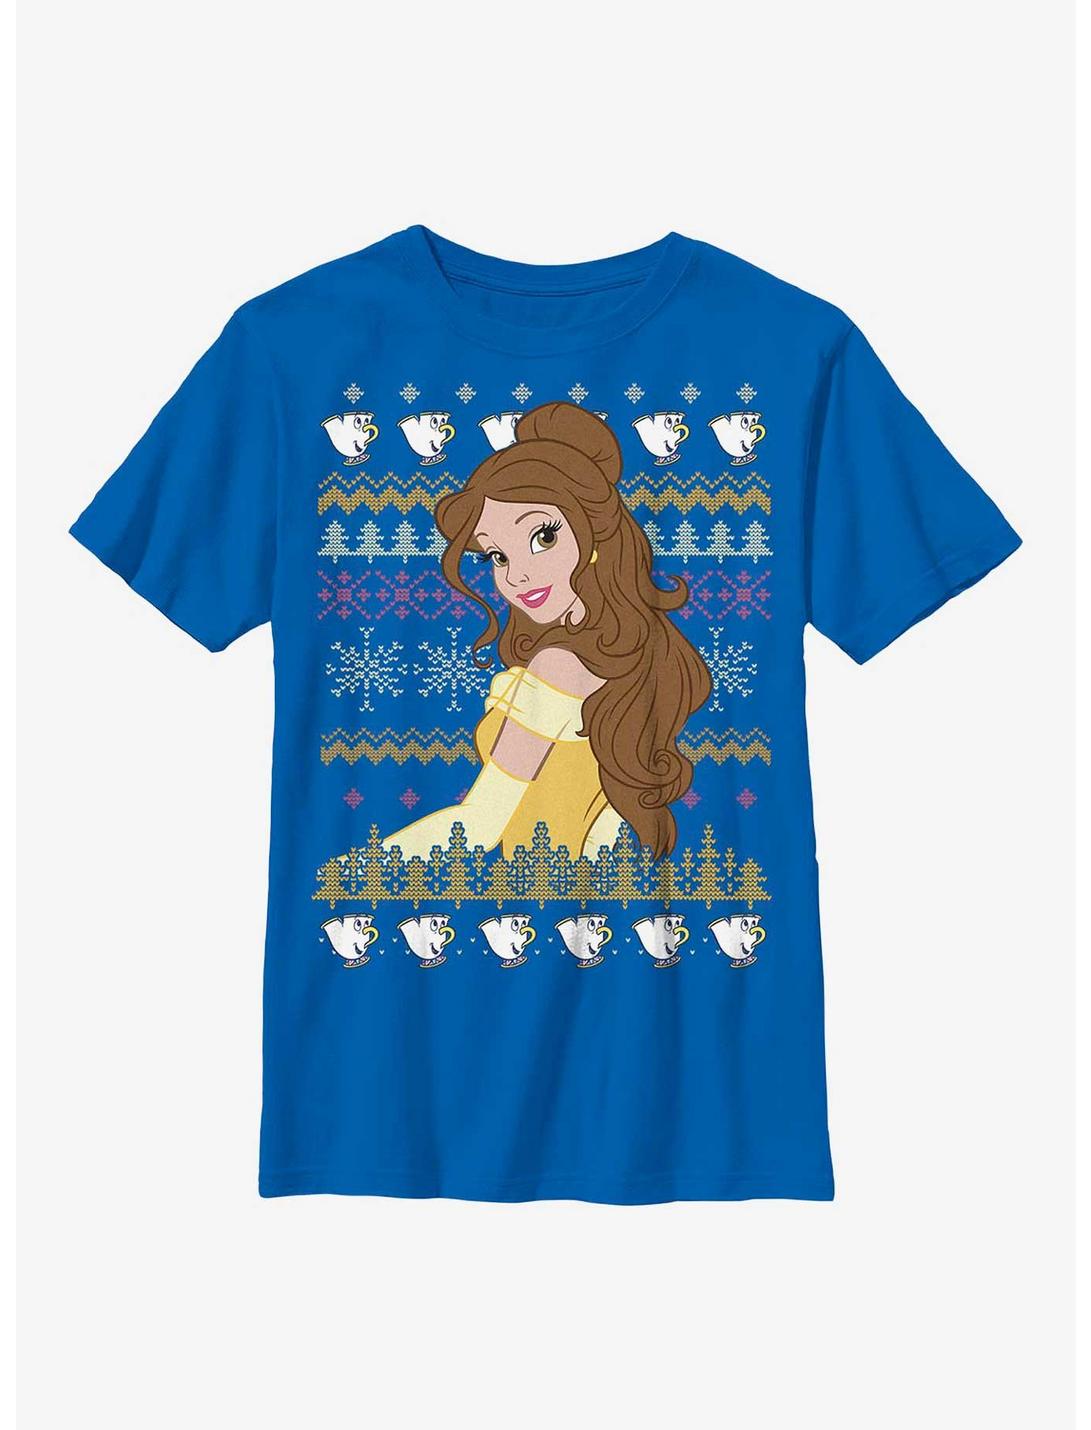 Disney Beauty And The Beast Belle Teacup Ugly Sweater Pattern Youth T-Shirt, ROYAL, hi-res